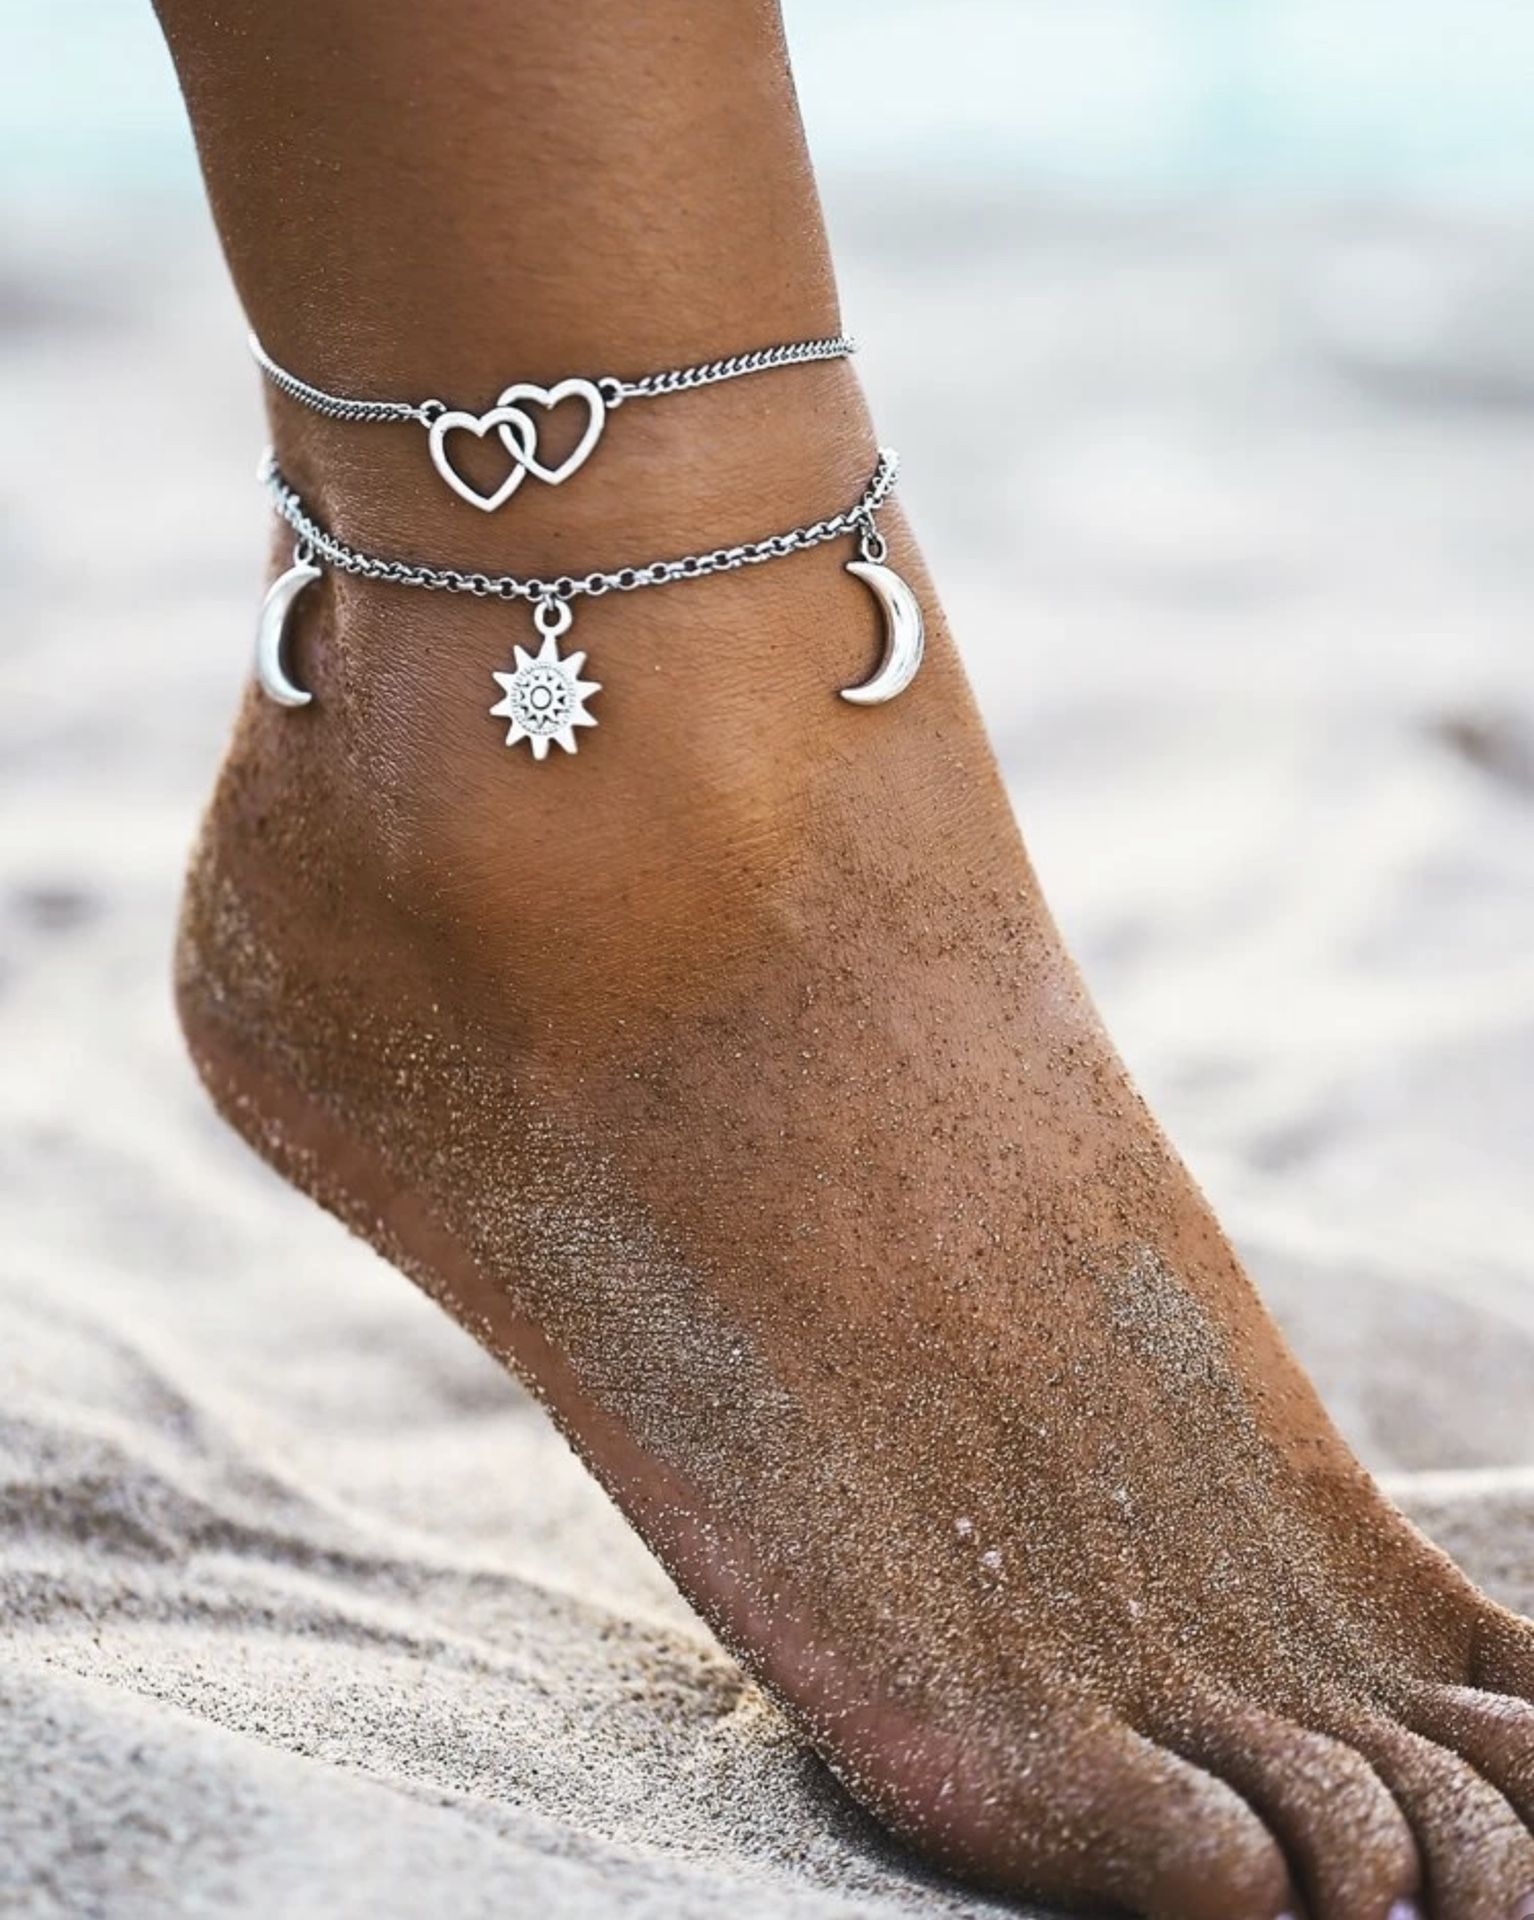 ONE LEFT Gorgeous NEW Layered Linked Heart, Moon And Star Charms Women’s Fashion Jewelry Anklet 